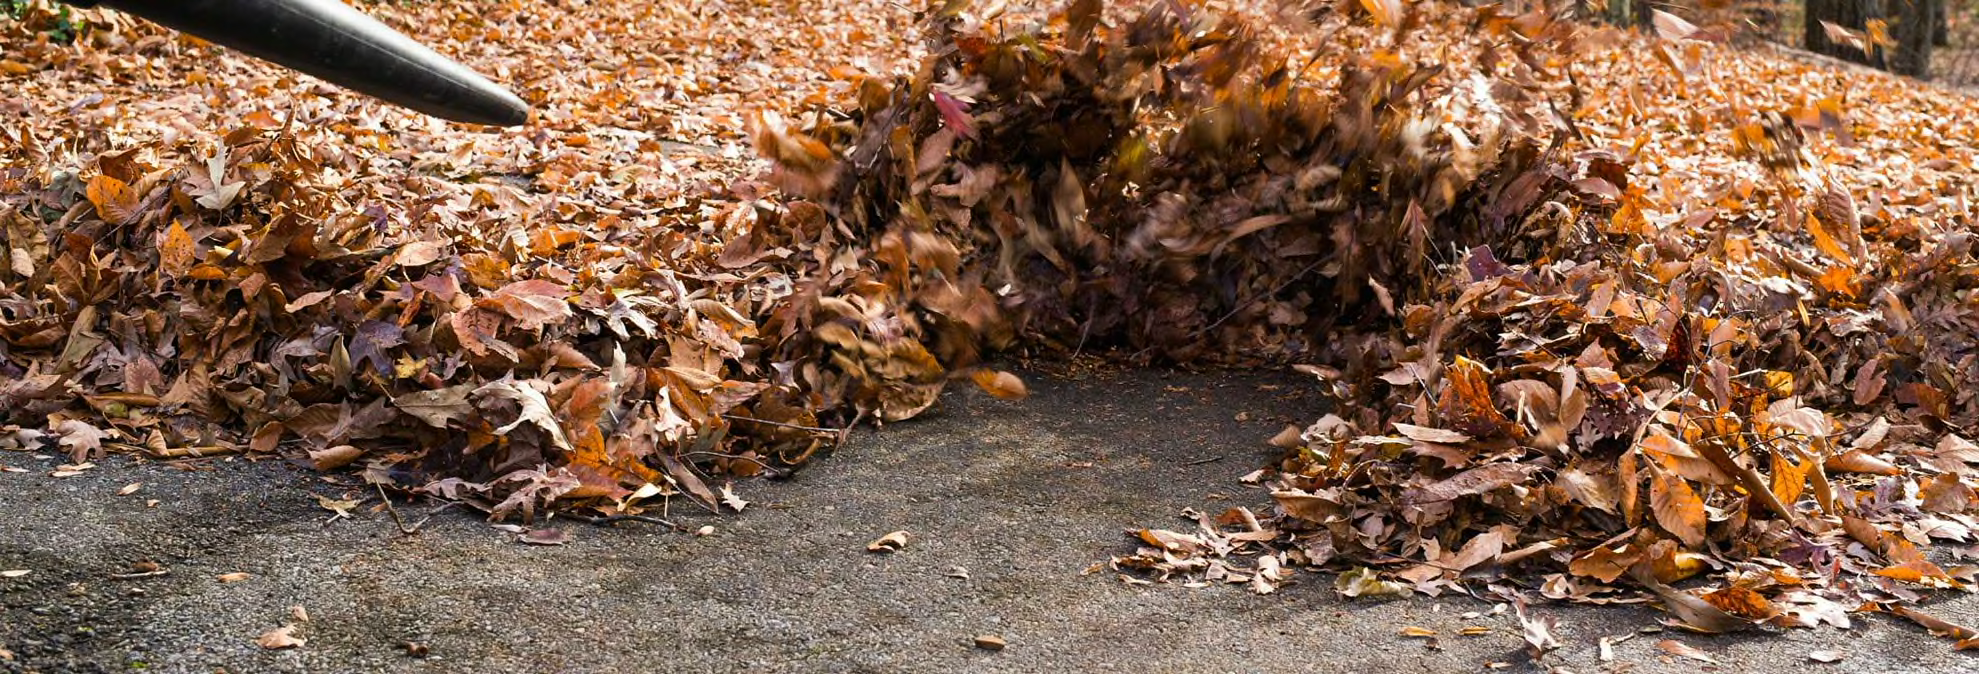 A leaf blower blowing a pile of leaves